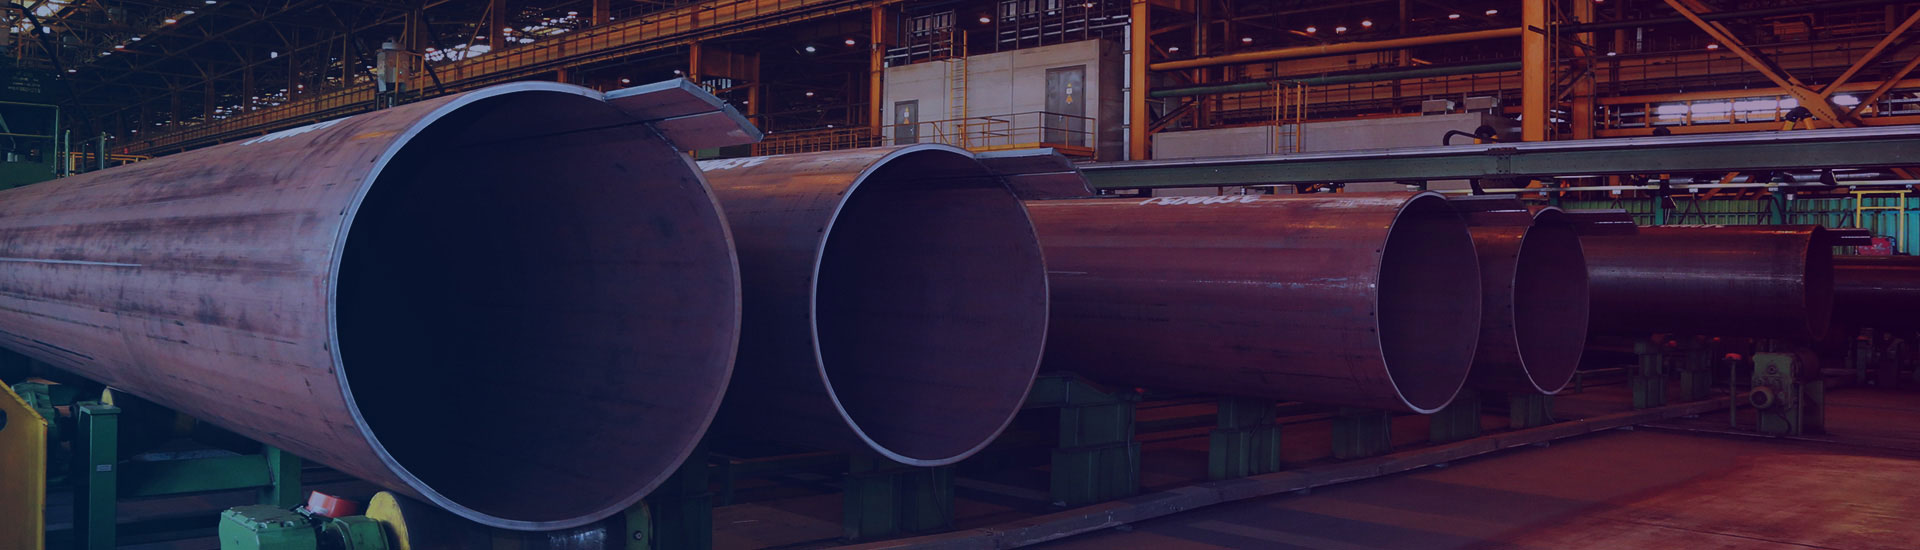 seamless pipe,bs1387 pipe,carbon steel pipe